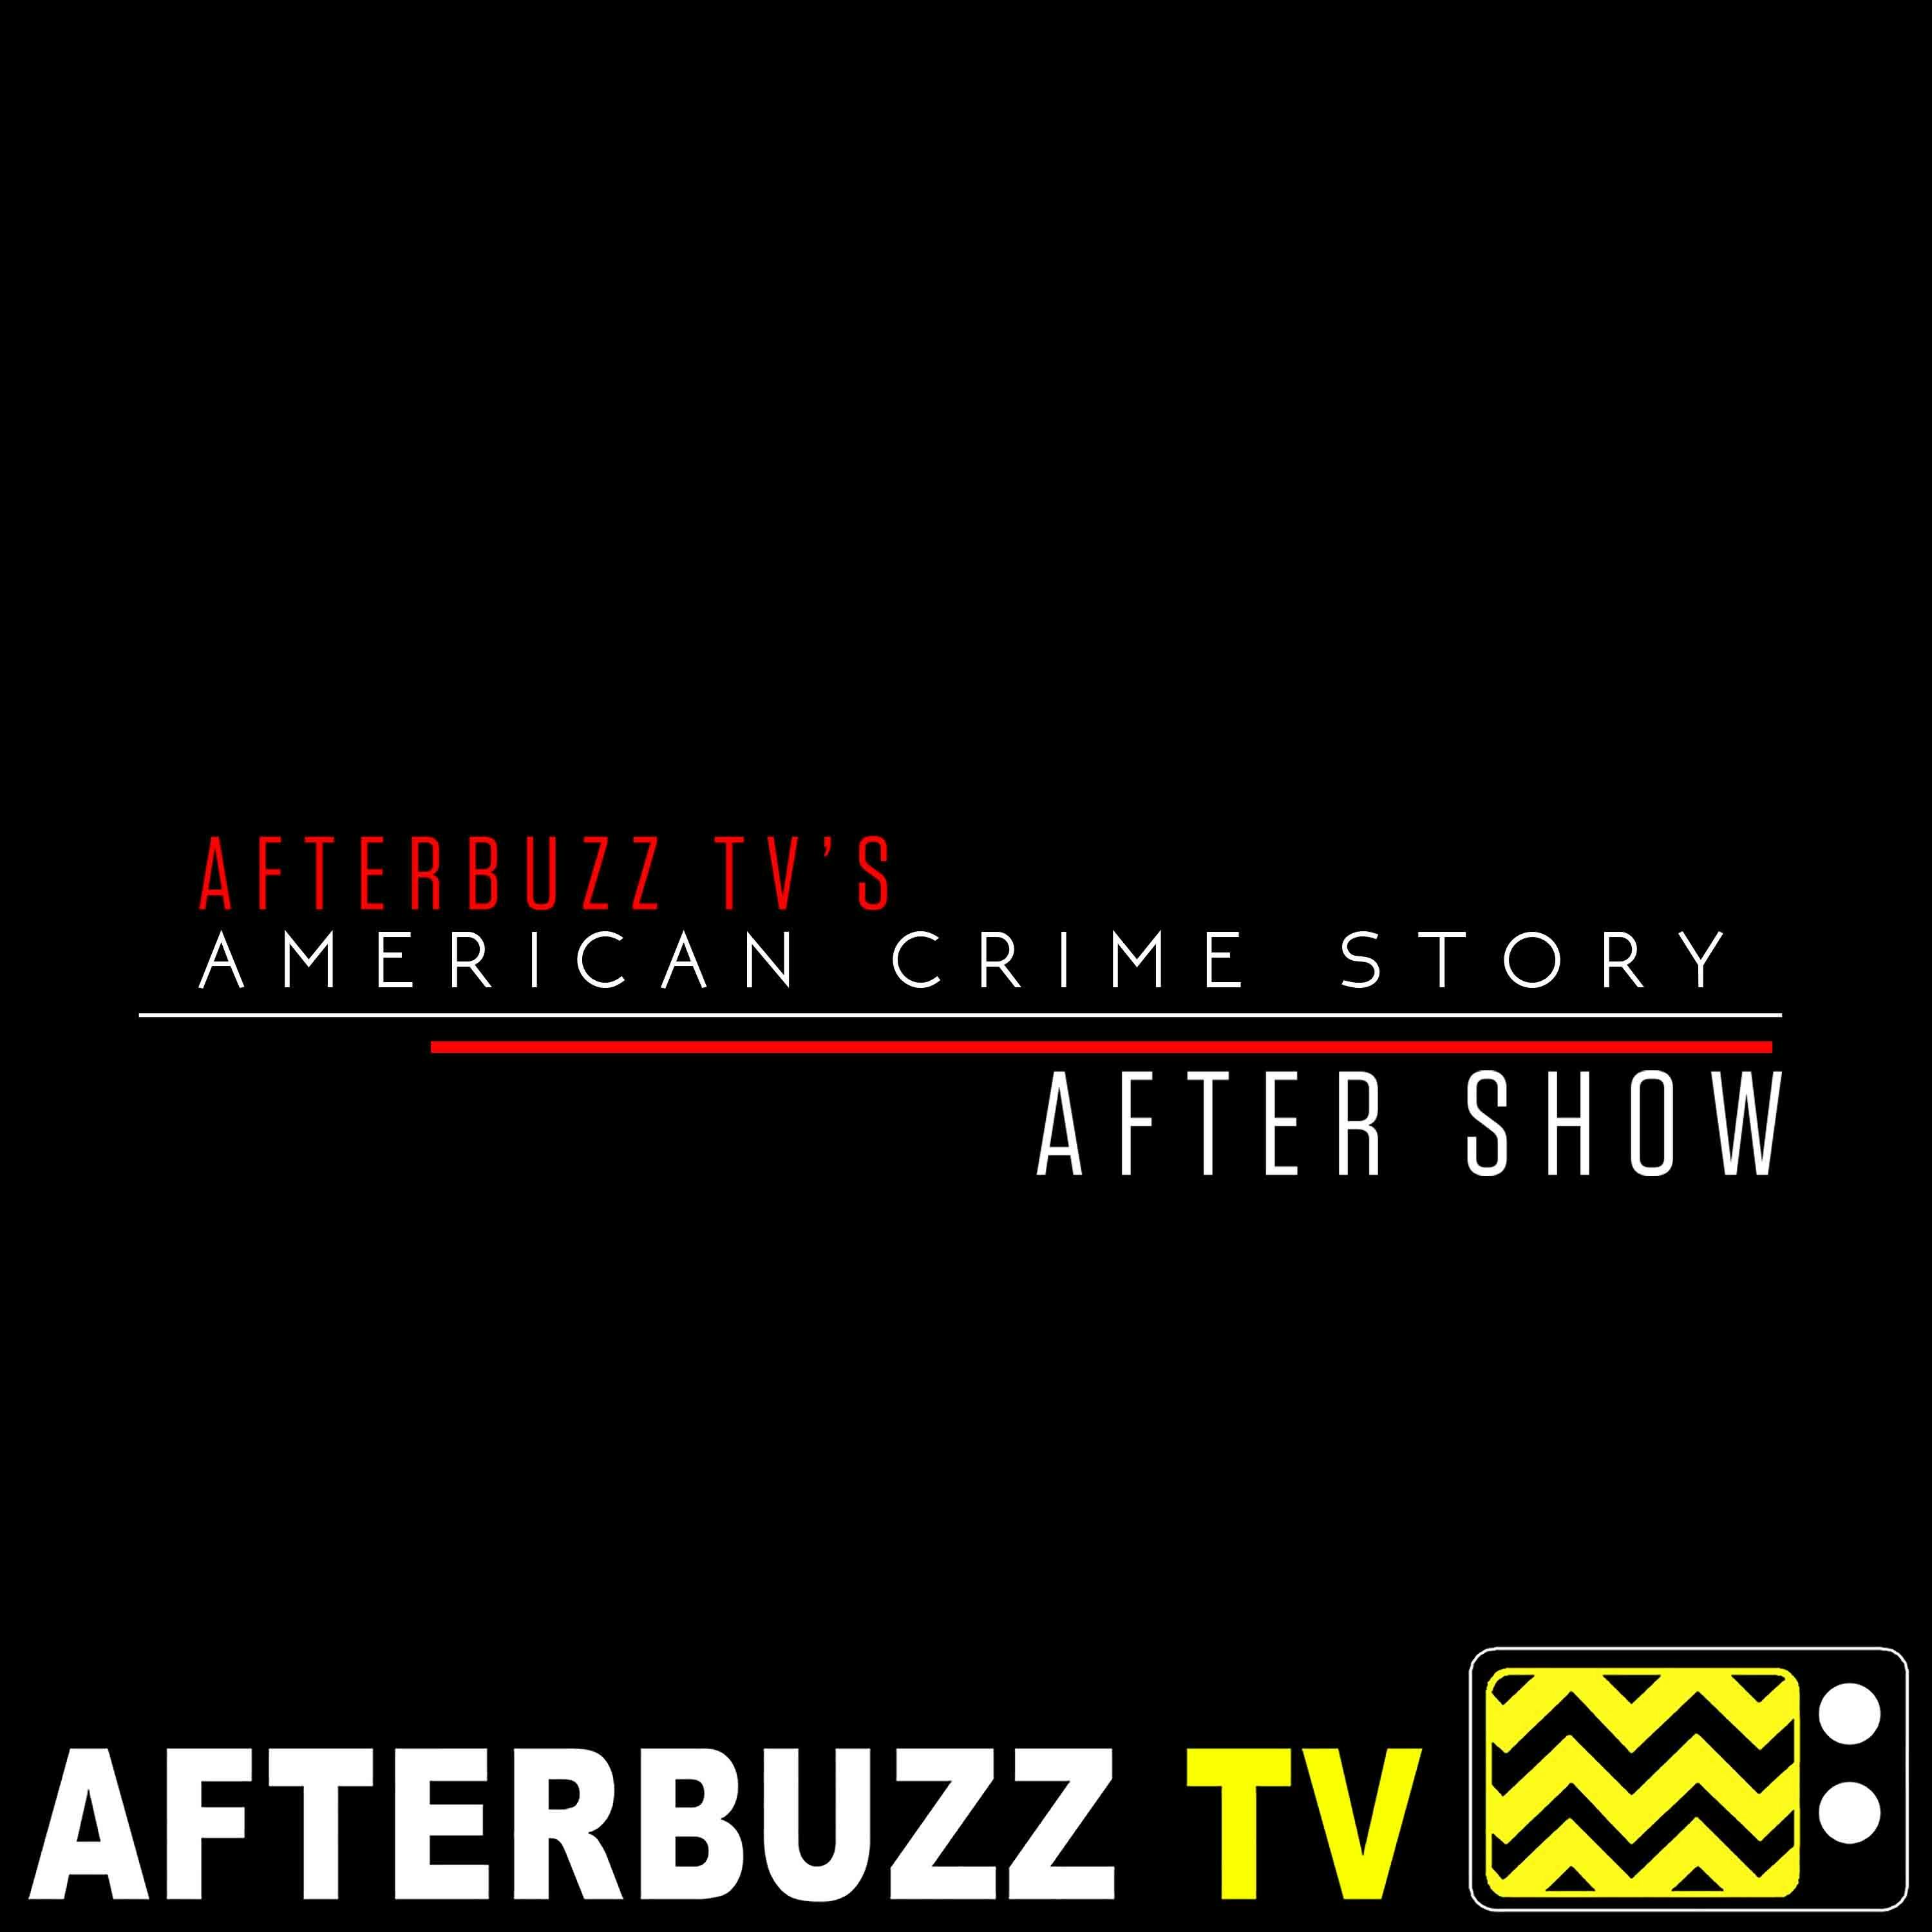 The People vs OJ Simpson | The Dream Team E:3 | AfterBuzz TV AfterShow